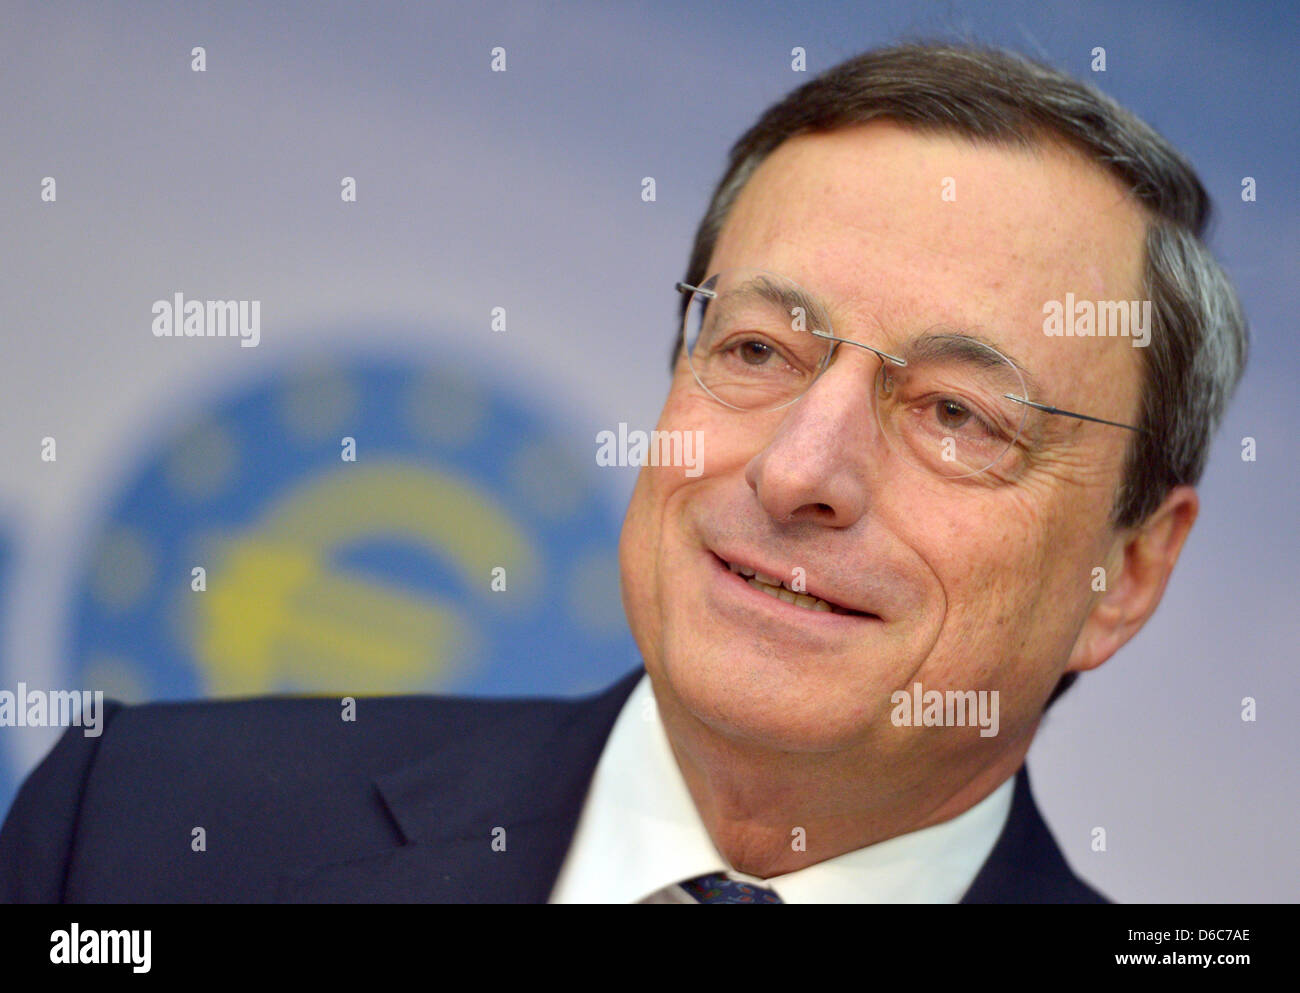 President of the European Central Bank Mario Draghi speaks at a press conference about the ECB's monetary policy in Frankfurt am Main, Germany, 06 September 2012. Photo: BORIS ROESSLER Stock Photo